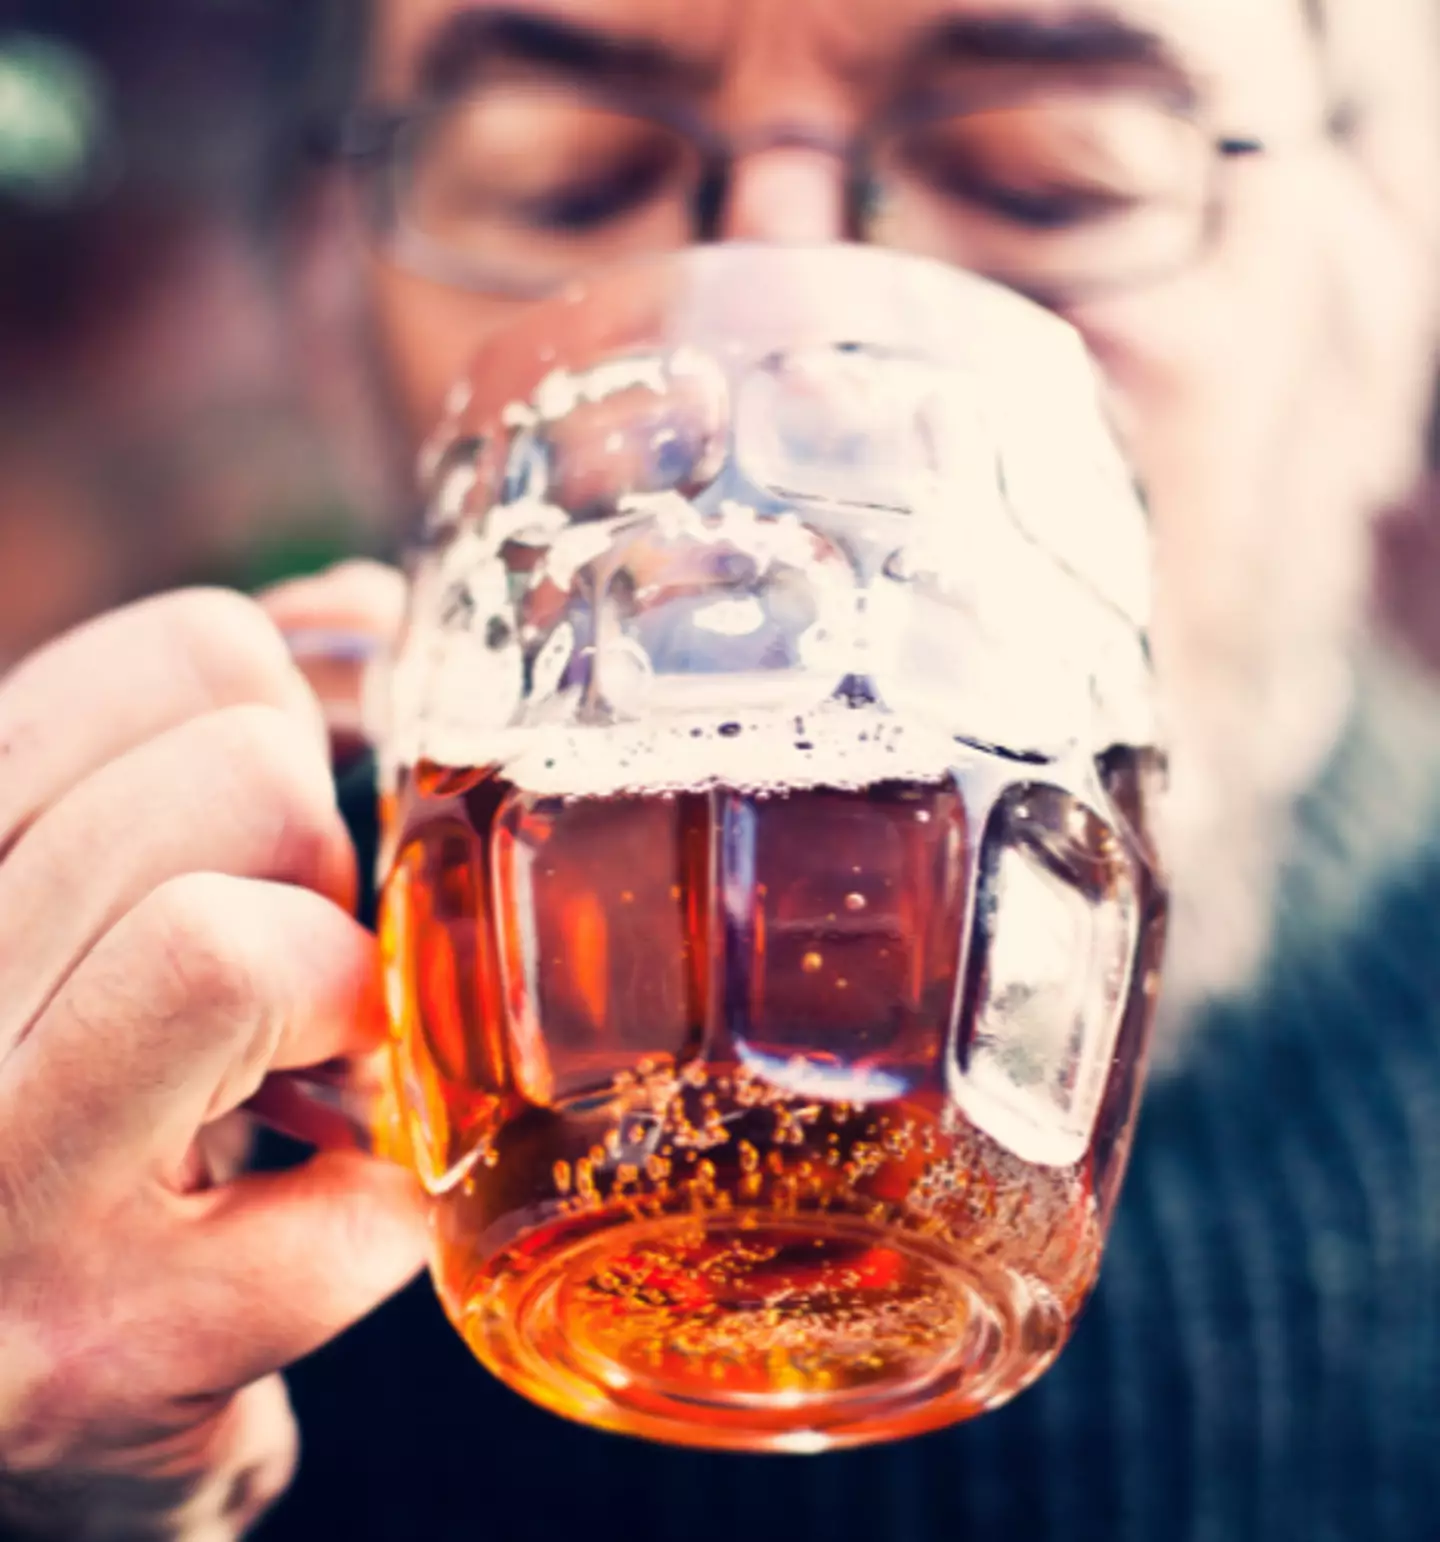 The NHS says that alcohol misuse is when you drink in a way that's harmful, or when you're dependent on alcohol. (Getty Stock Images)